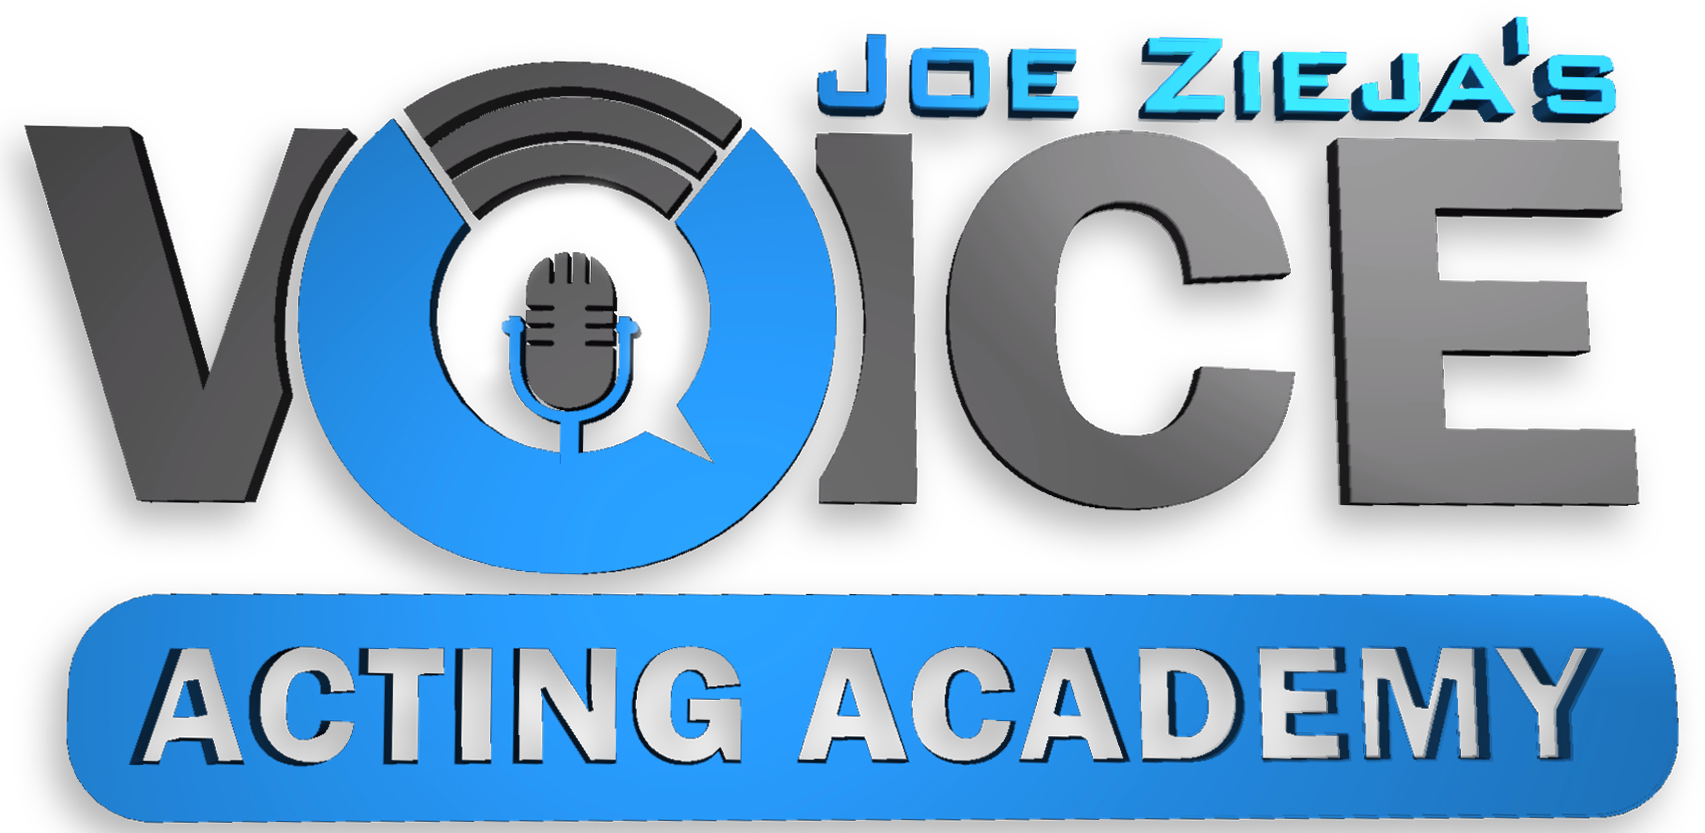 Voice Acting Academy By Joe Zieja - Free Download Course